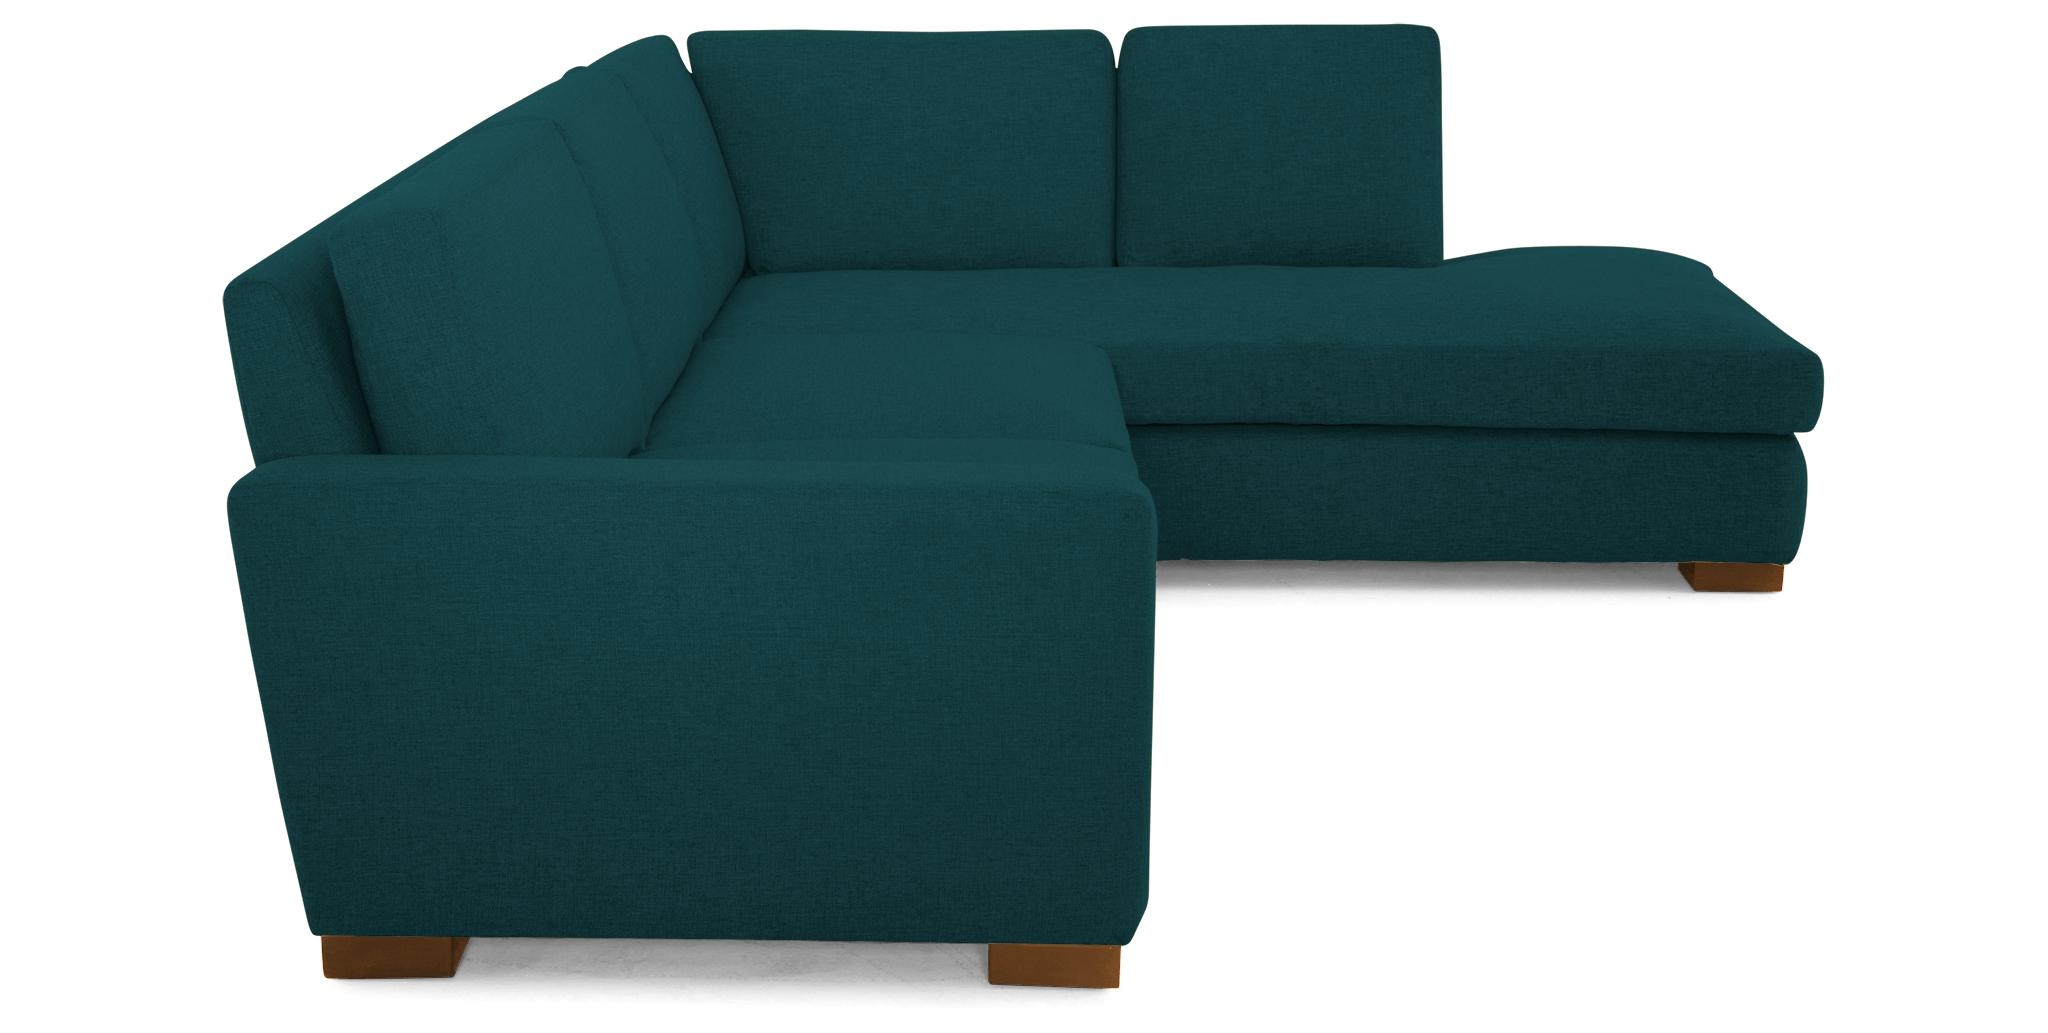 Blue Anton Mid Century Modern Sectional with Bumper - Royale Peacock - Mocha - Right  - Image 2